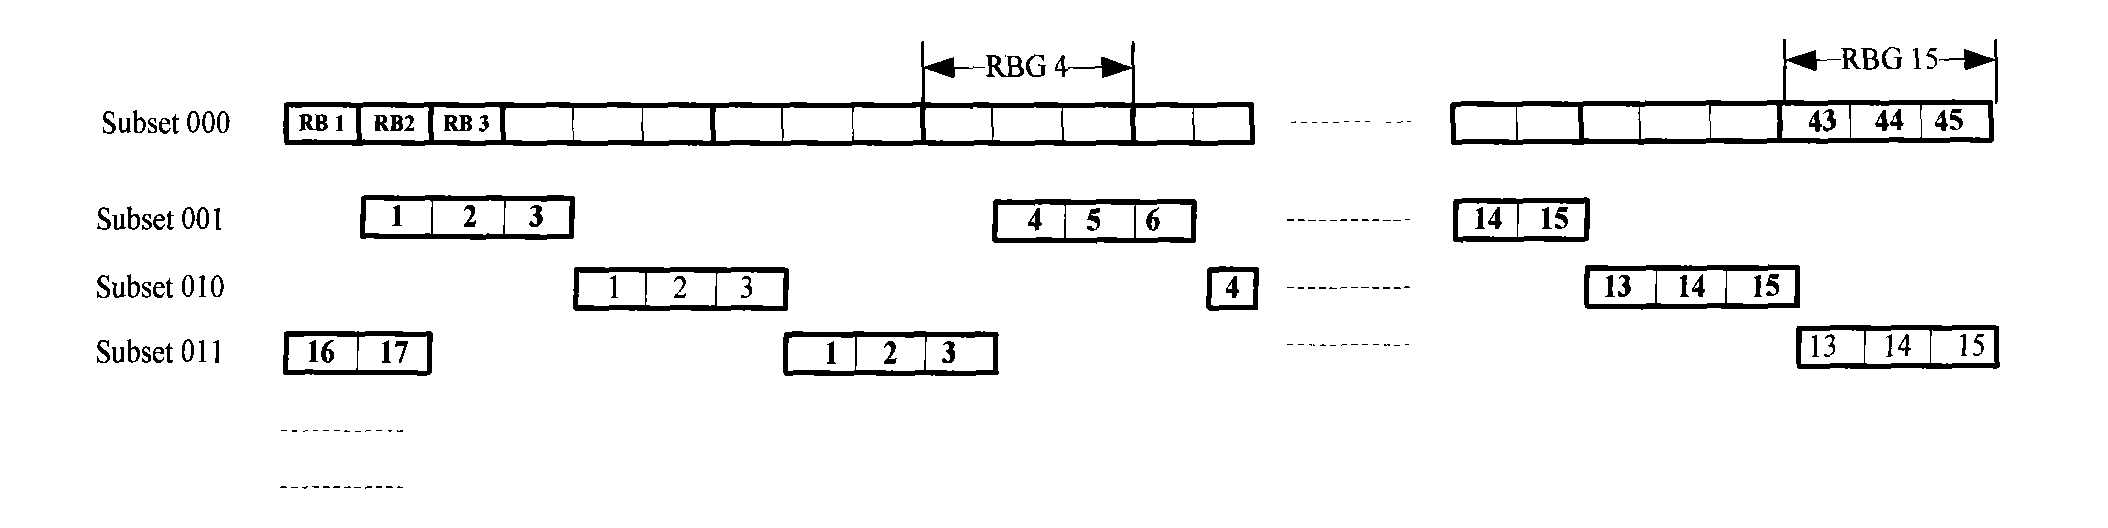 Method for indicating downlink resource allocation